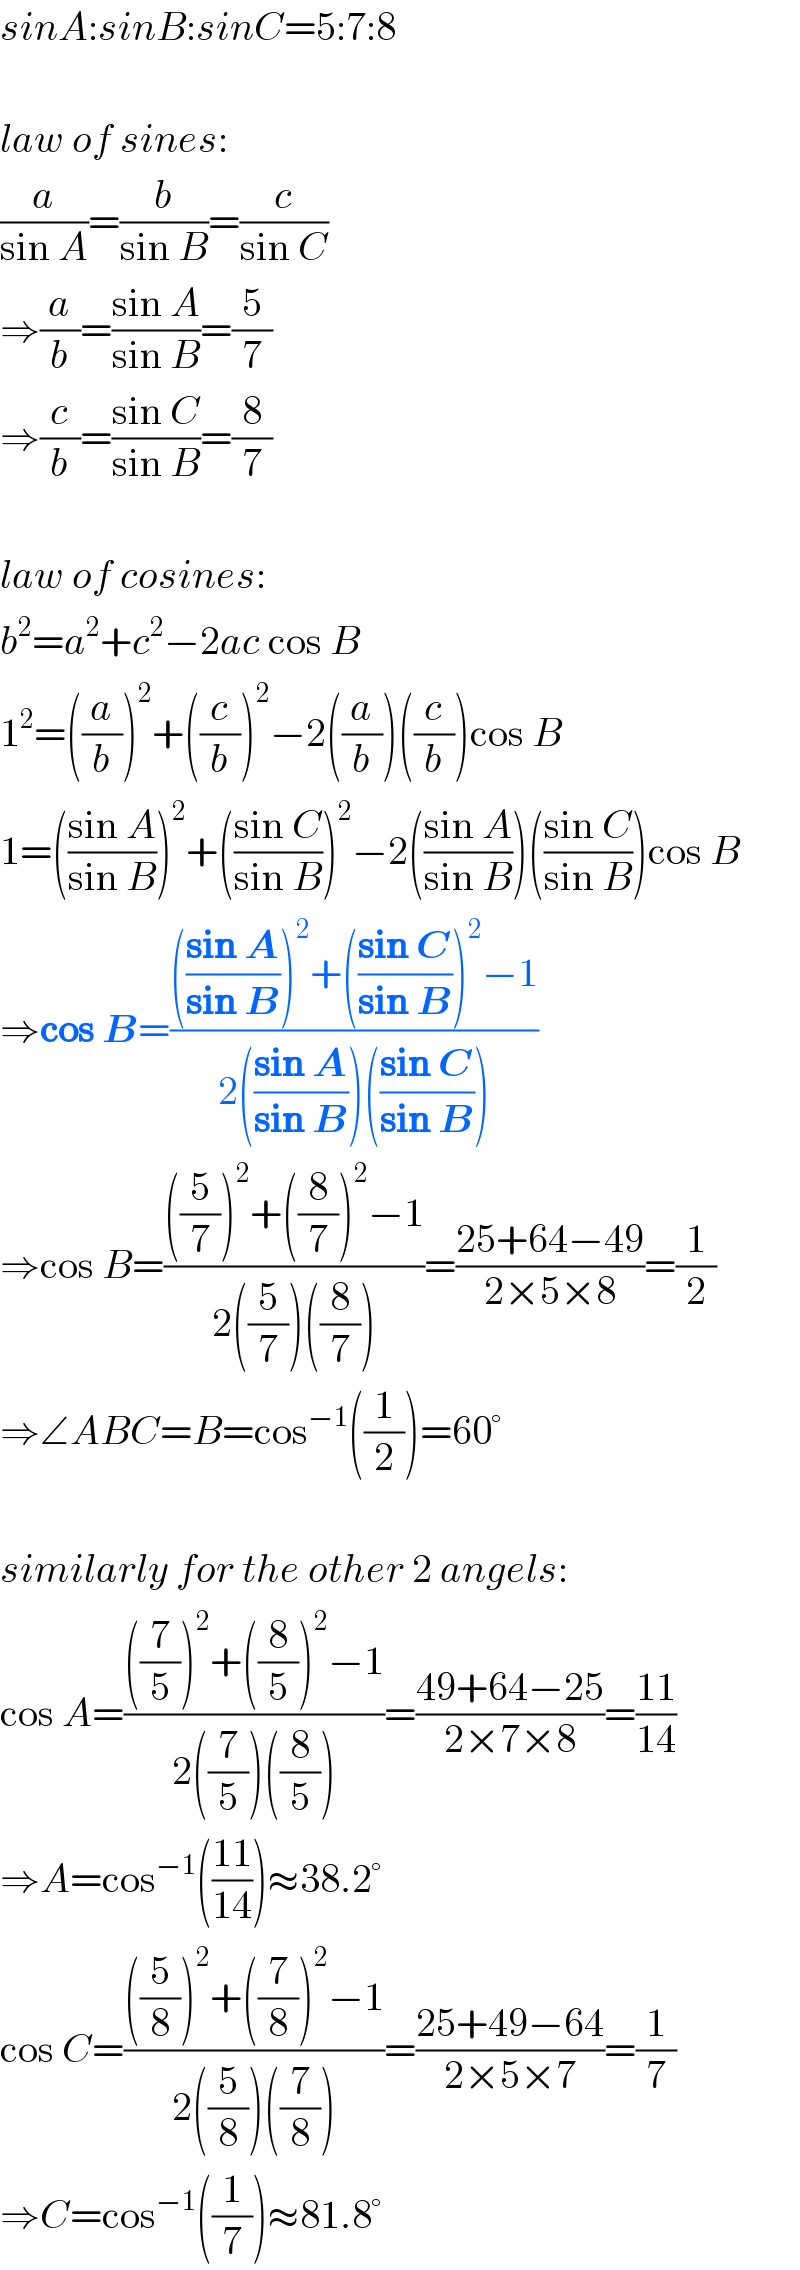 sinA:sinB:sinC=5:7:8    law of sines:  (a/(sin A))=(b/(sin B))=(c/(sin C))  ⇒(a/b)=((sin A)/(sin B))=(5/7)  ⇒(c/b)=((sin C)/(sin B))=(8/7)    law of cosines:  b^2 =a^2 +c^2 −2ac cos B  1^2 =((a/b))^2 +((c/b))^2 −2((a/b))((c/b))cos B  1=(((sin A)/(sin B)))^2 +(((sin C)/(sin B)))^2 −2(((sin A)/(sin B)))(((sin C)/(sin B)))cos B  ⇒cos B=(((((sin A)/(sin B)))^2 +(((sin C)/(sin B)))^2 −1)/(2(((sin A)/(sin B)))(((sin C)/(sin B)))))  ⇒cos B=((((5/7))^2 +((8/7))^2 −1)/(2((5/7))((8/7))))=((25+64−49)/(2×5×8))=(1/2)  ⇒∠ABC=B=cos^(−1) ((1/2))=60°    similarly for the other 2 angels:  cos A=((((7/5))^2 +((8/5))^2 −1)/(2((7/5))((8/5))))=((49+64−25)/(2×7×8))=((11)/(14))  ⇒A=cos^(−1) (((11)/(14)))≈38.2°  cos C=((((5/8))^2 +((7/8))^2 −1)/(2((5/8))((7/8))))=((25+49−64)/(2×5×7))=(1/7)  ⇒C=cos^(−1) ((1/7))≈81.8°  